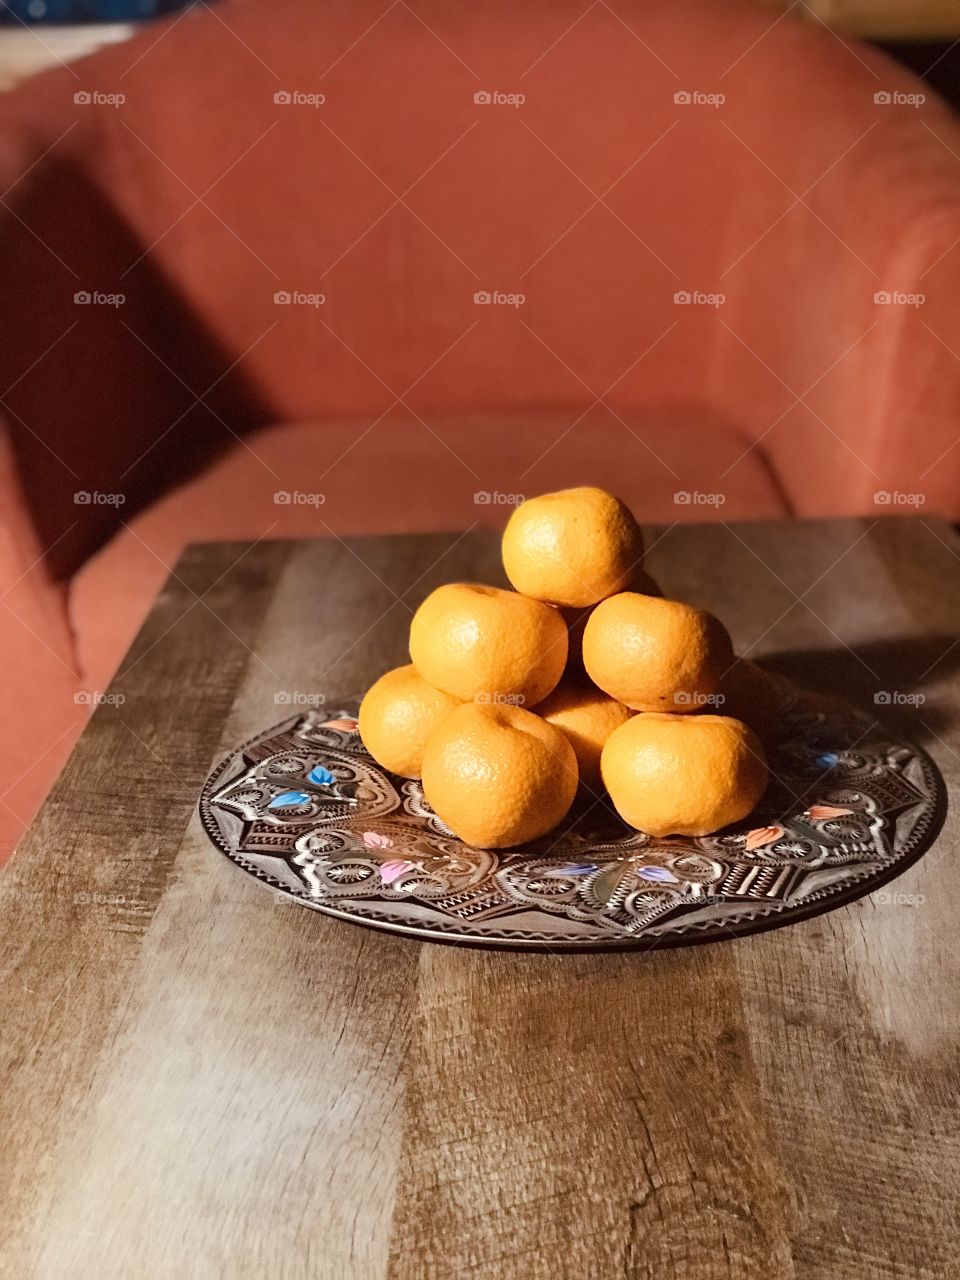 A portrait of a beautiful embellished metal plate of mandarin oranges. The plate is placed on a wood table and there is an orange chair behind the table. 